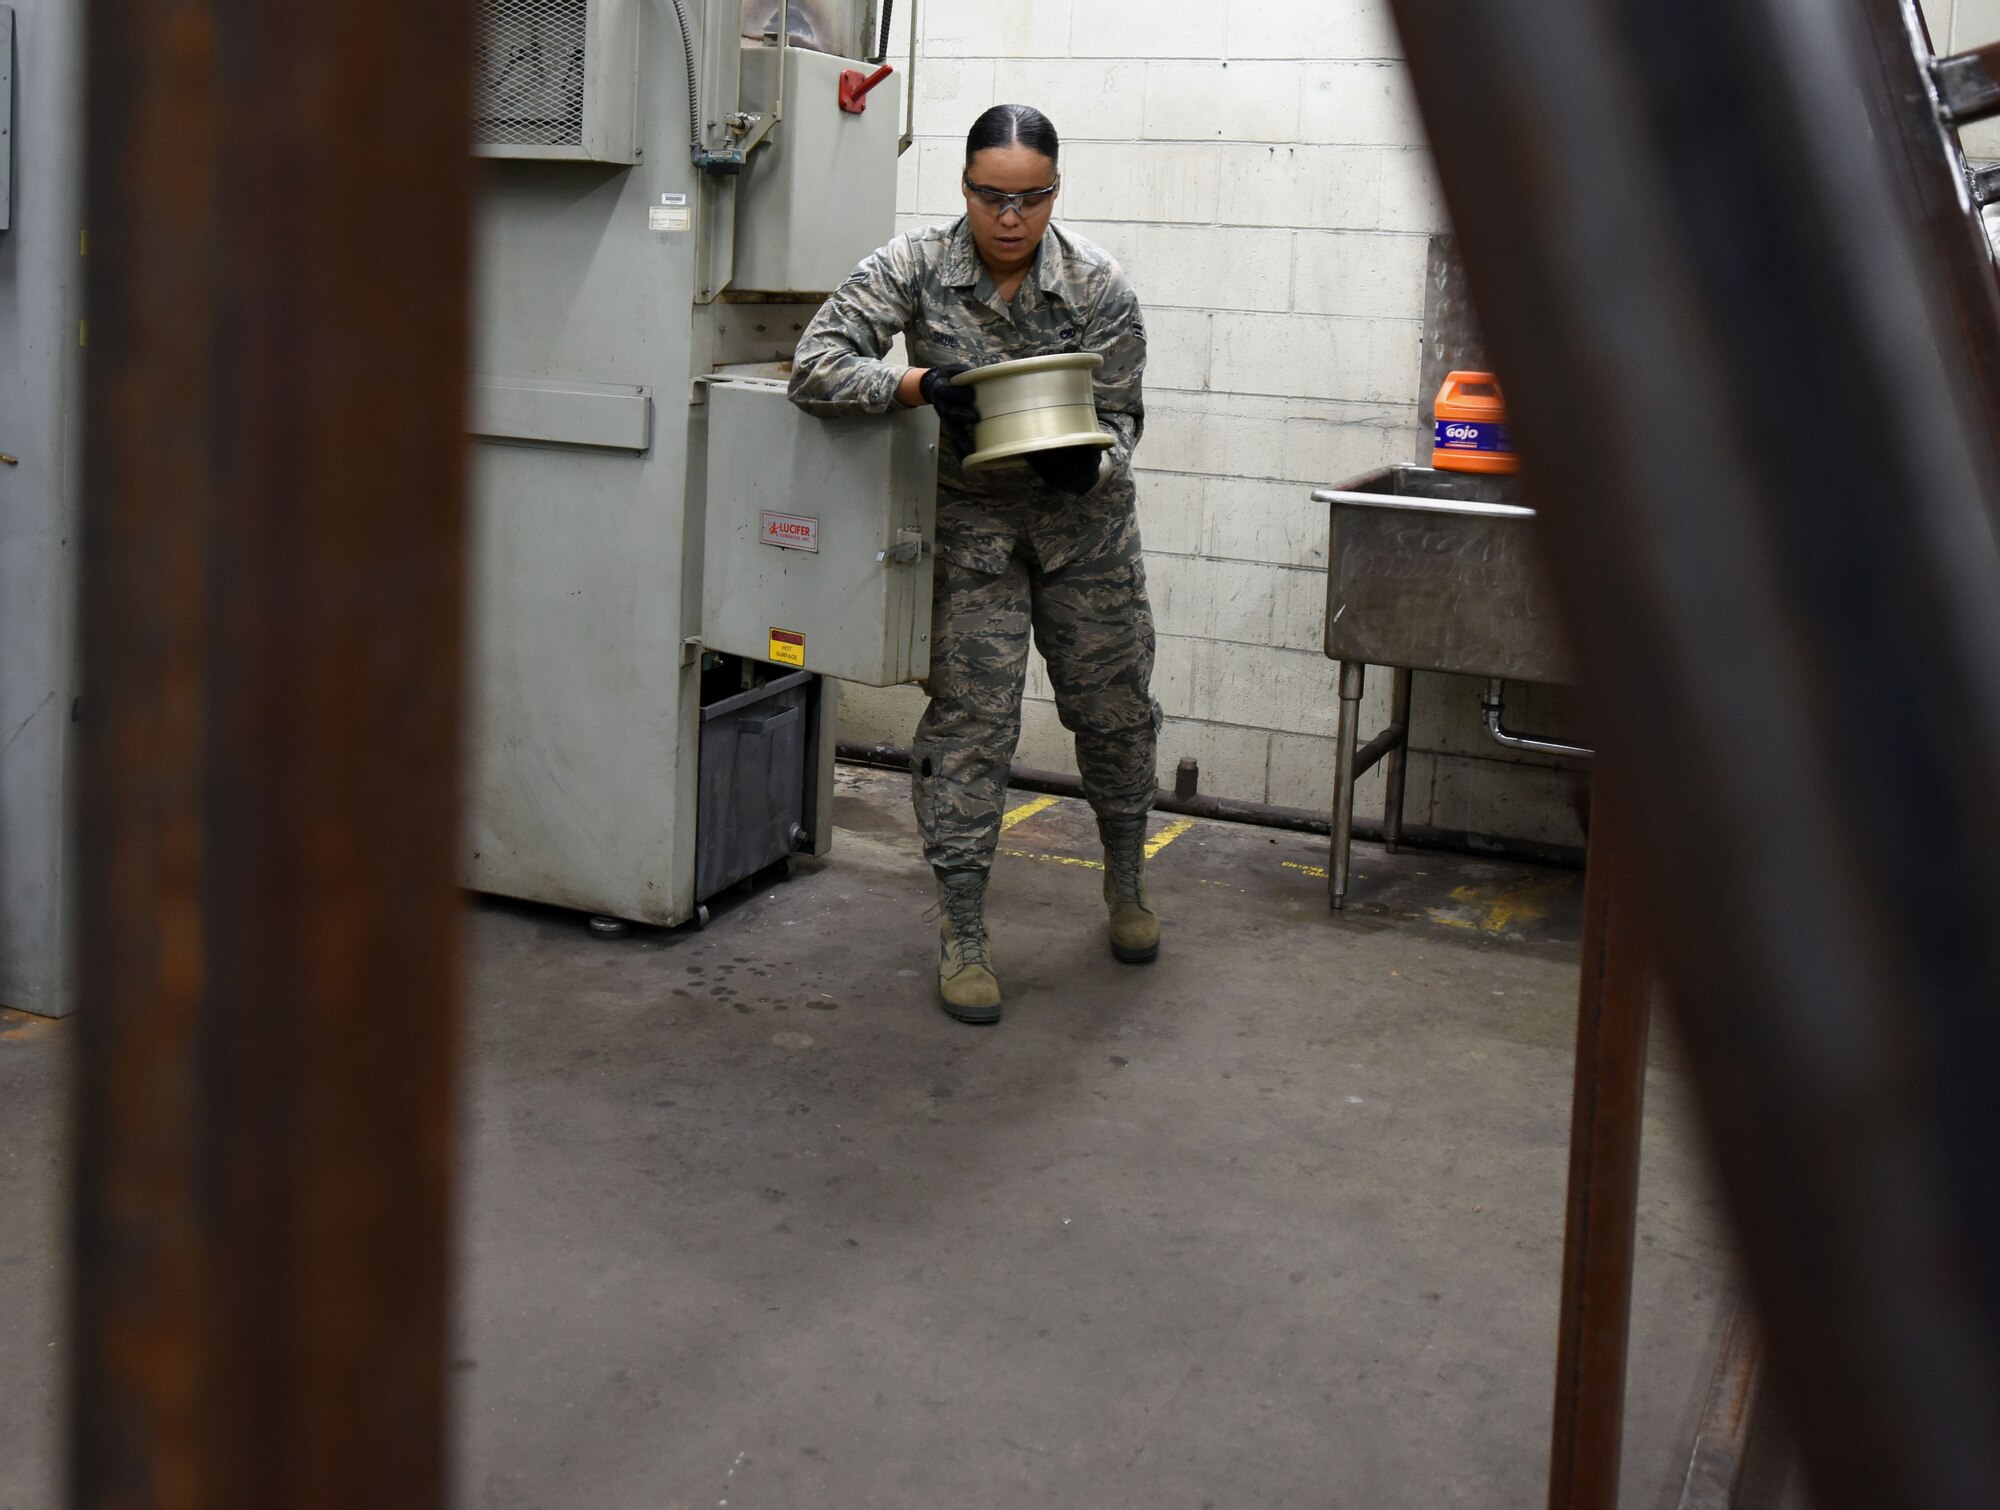 U.S. Air Force Airman 1st Class Sondra Saul, 20th Equipment Maintenance Squadron aircraft metals technician apprentice, retrieves an F-16 Fighting Falcon wheel bearing, from an oven in the metal shop, at Shaw Air Force Base S.C., Nov. 30, 2018.